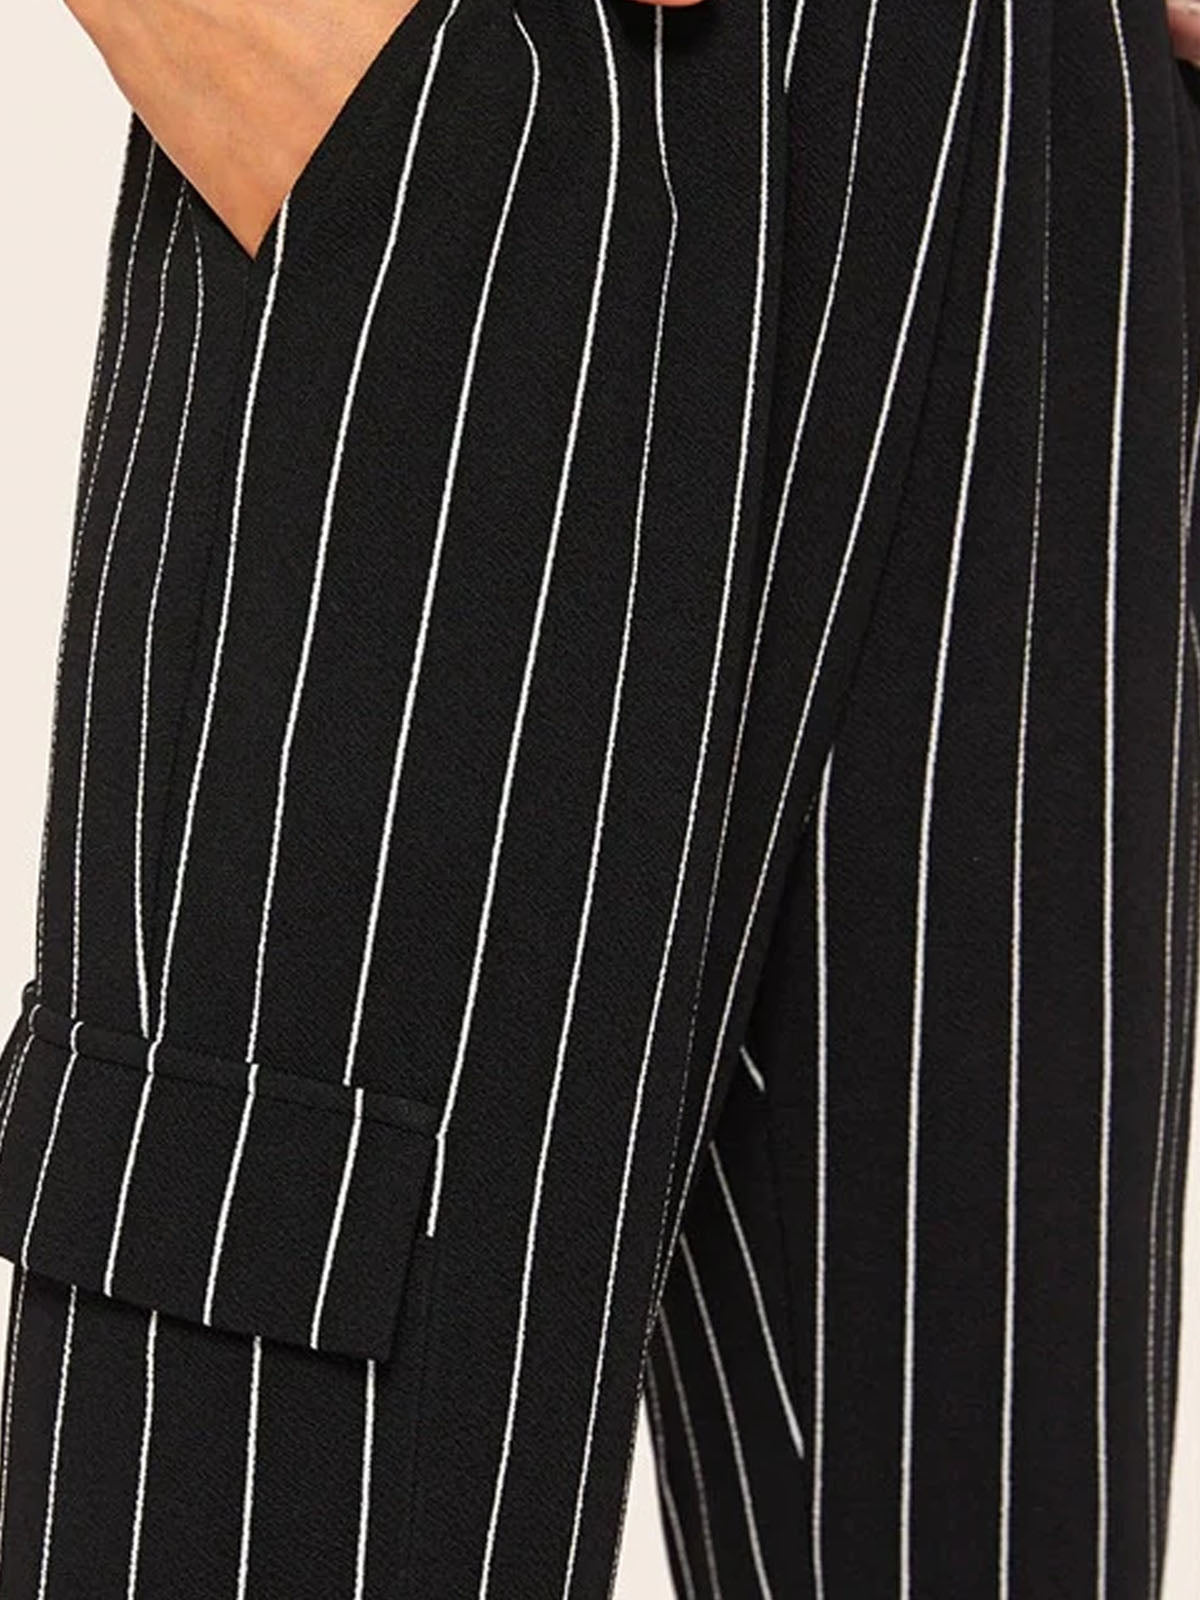 Women's Vertical Striped  Casual Pants